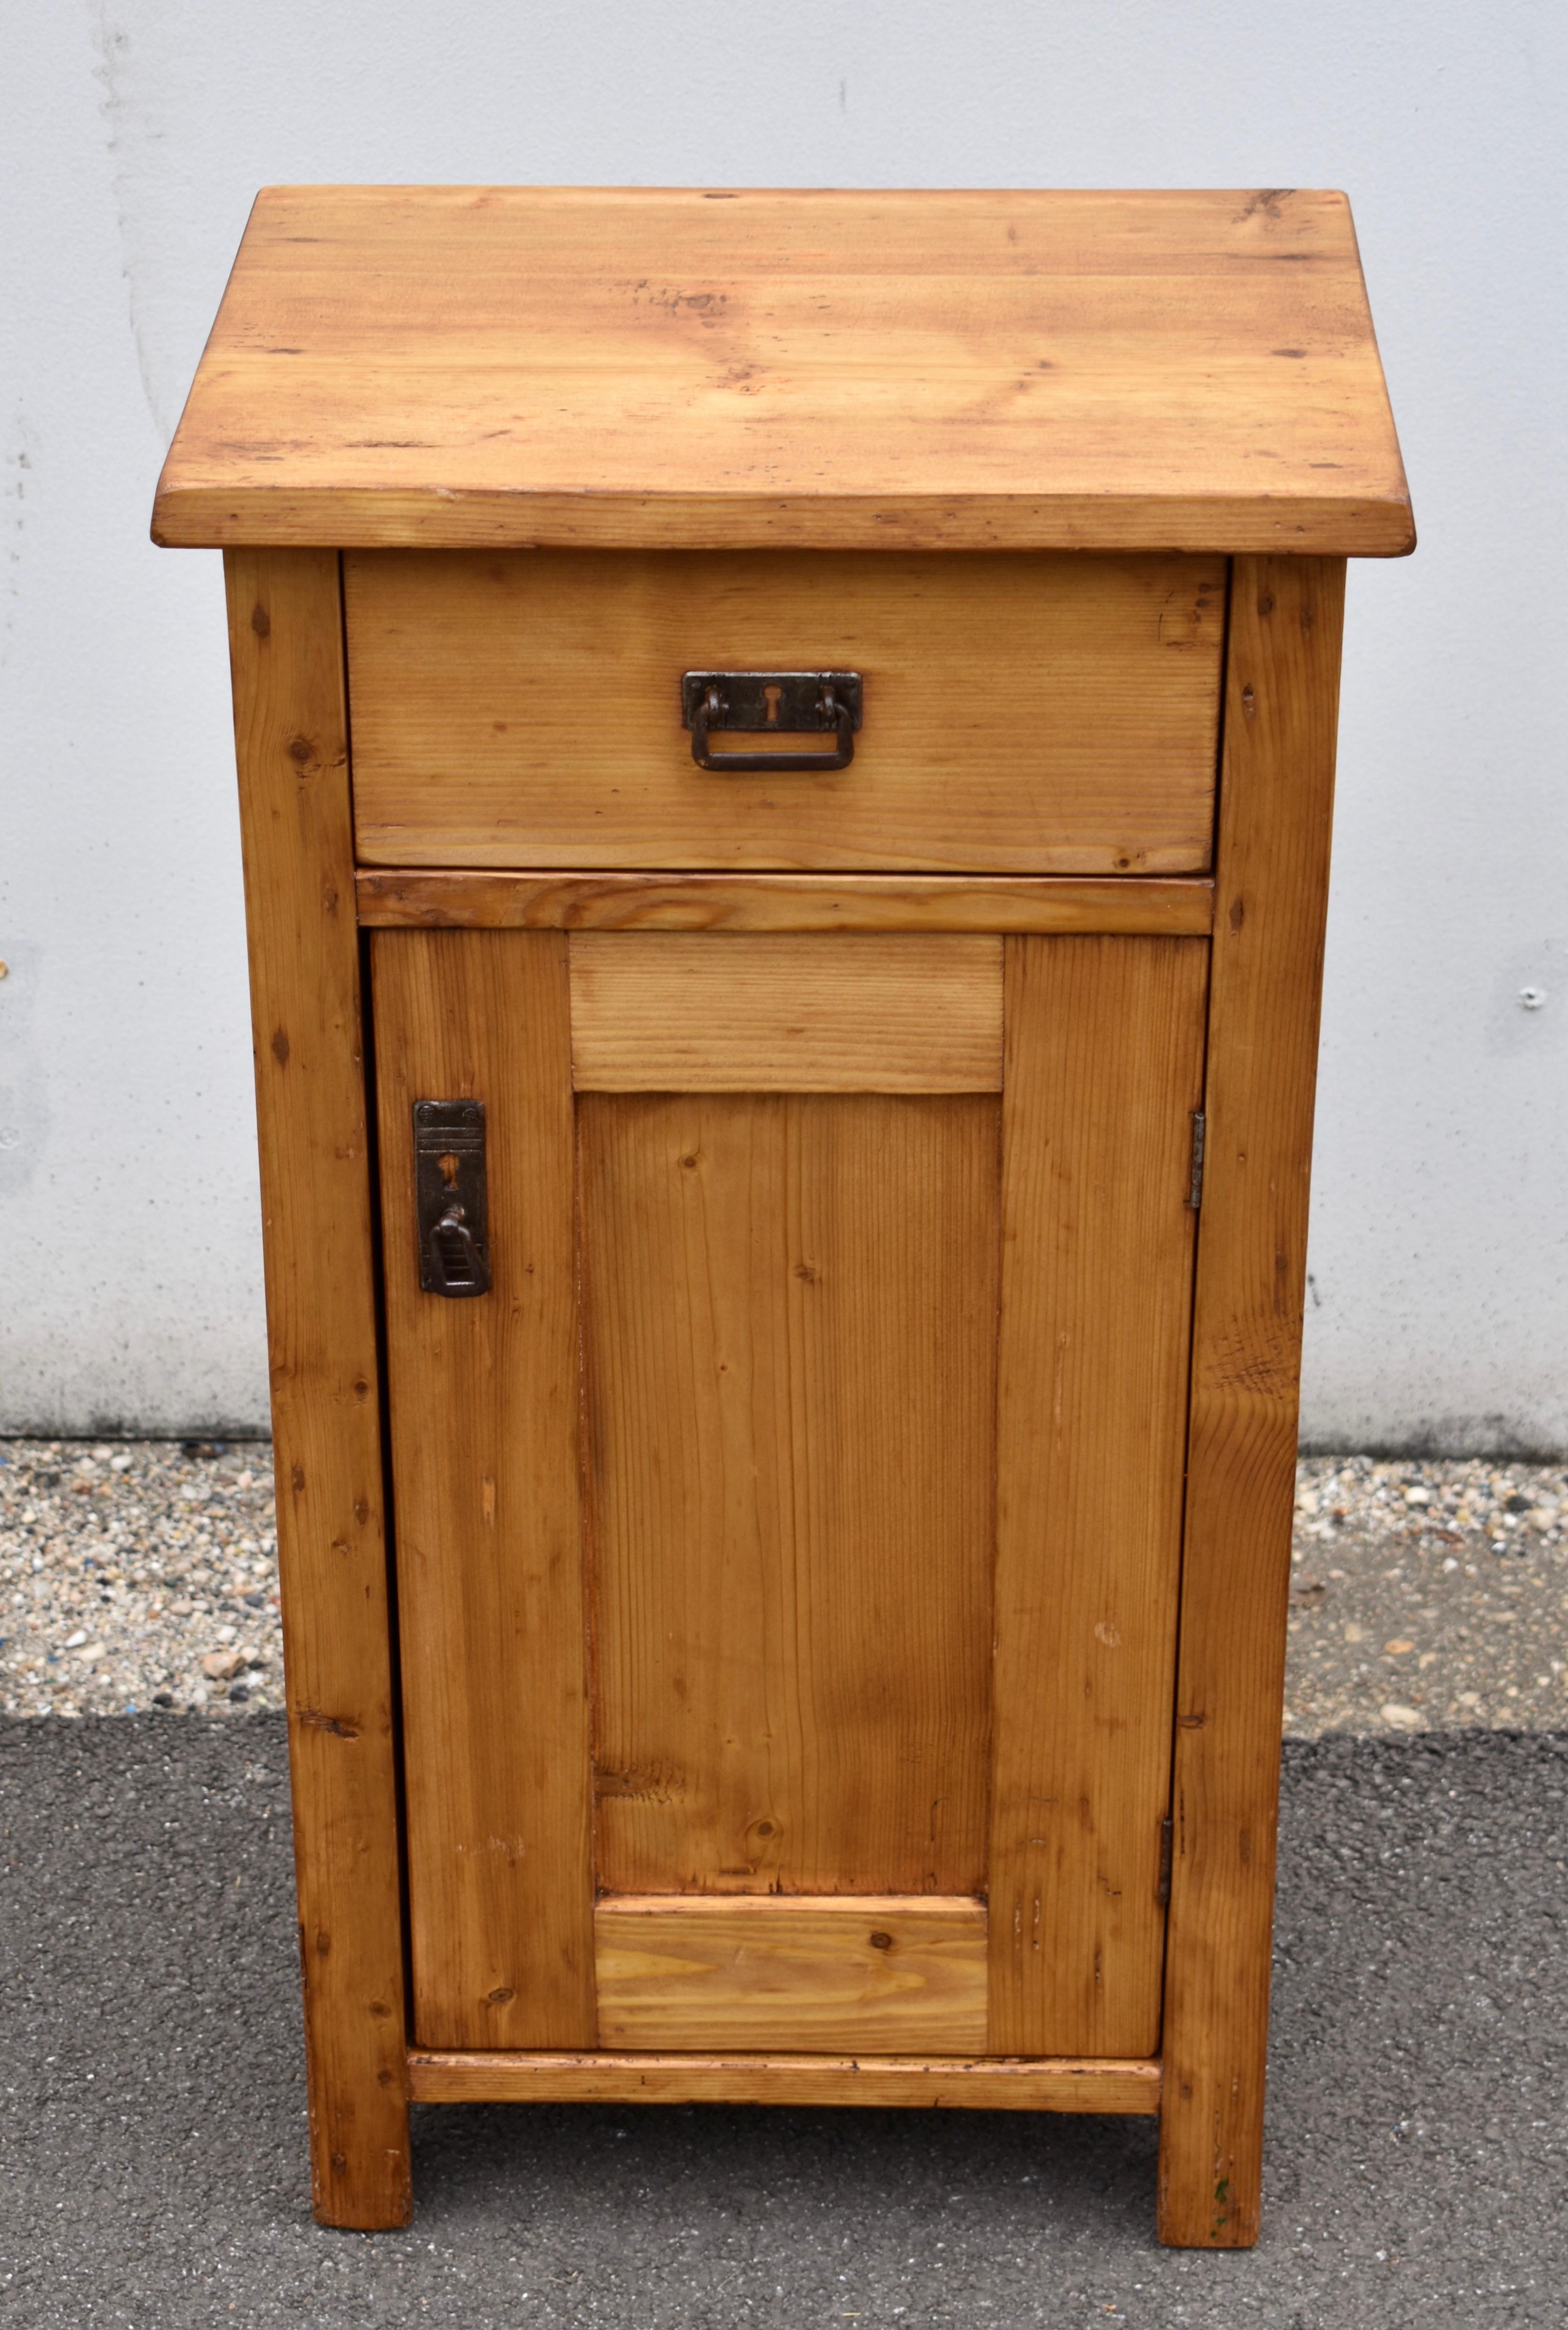 This is an attractive and versatile nightstand in the usual configuration of one door and one drawer.  The sides are flat-paneled, as is the door, and the drawer is lap-jointed. This piece is distinguished by clean, straight lines and a lovely honey